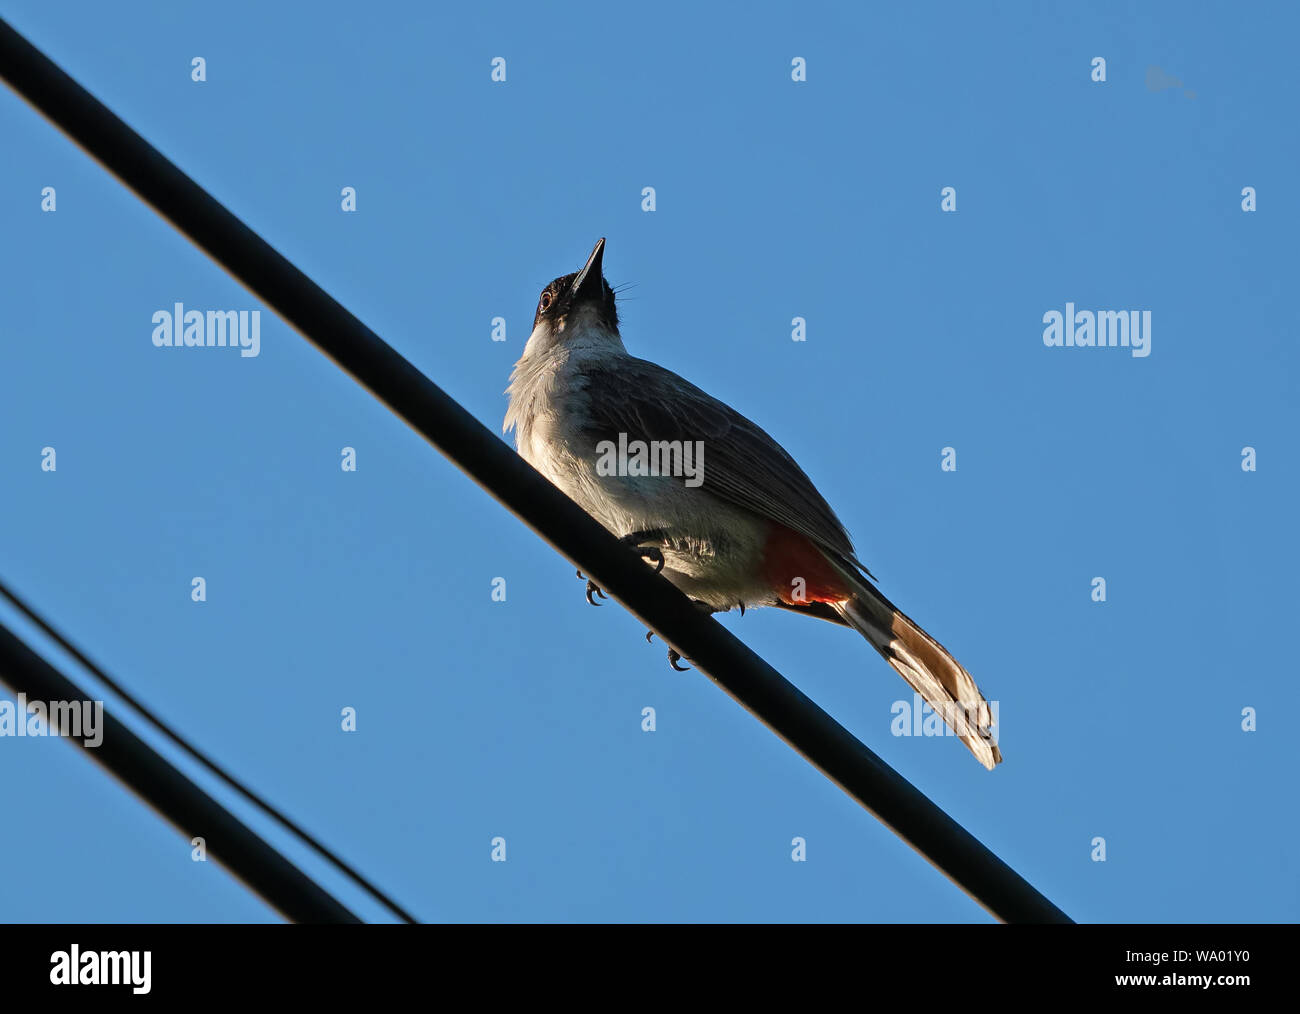 Closeup Sooty-Headed Bulbul Bird Perched on The Electric Wire Isolated on Blue Sky Stock Photo